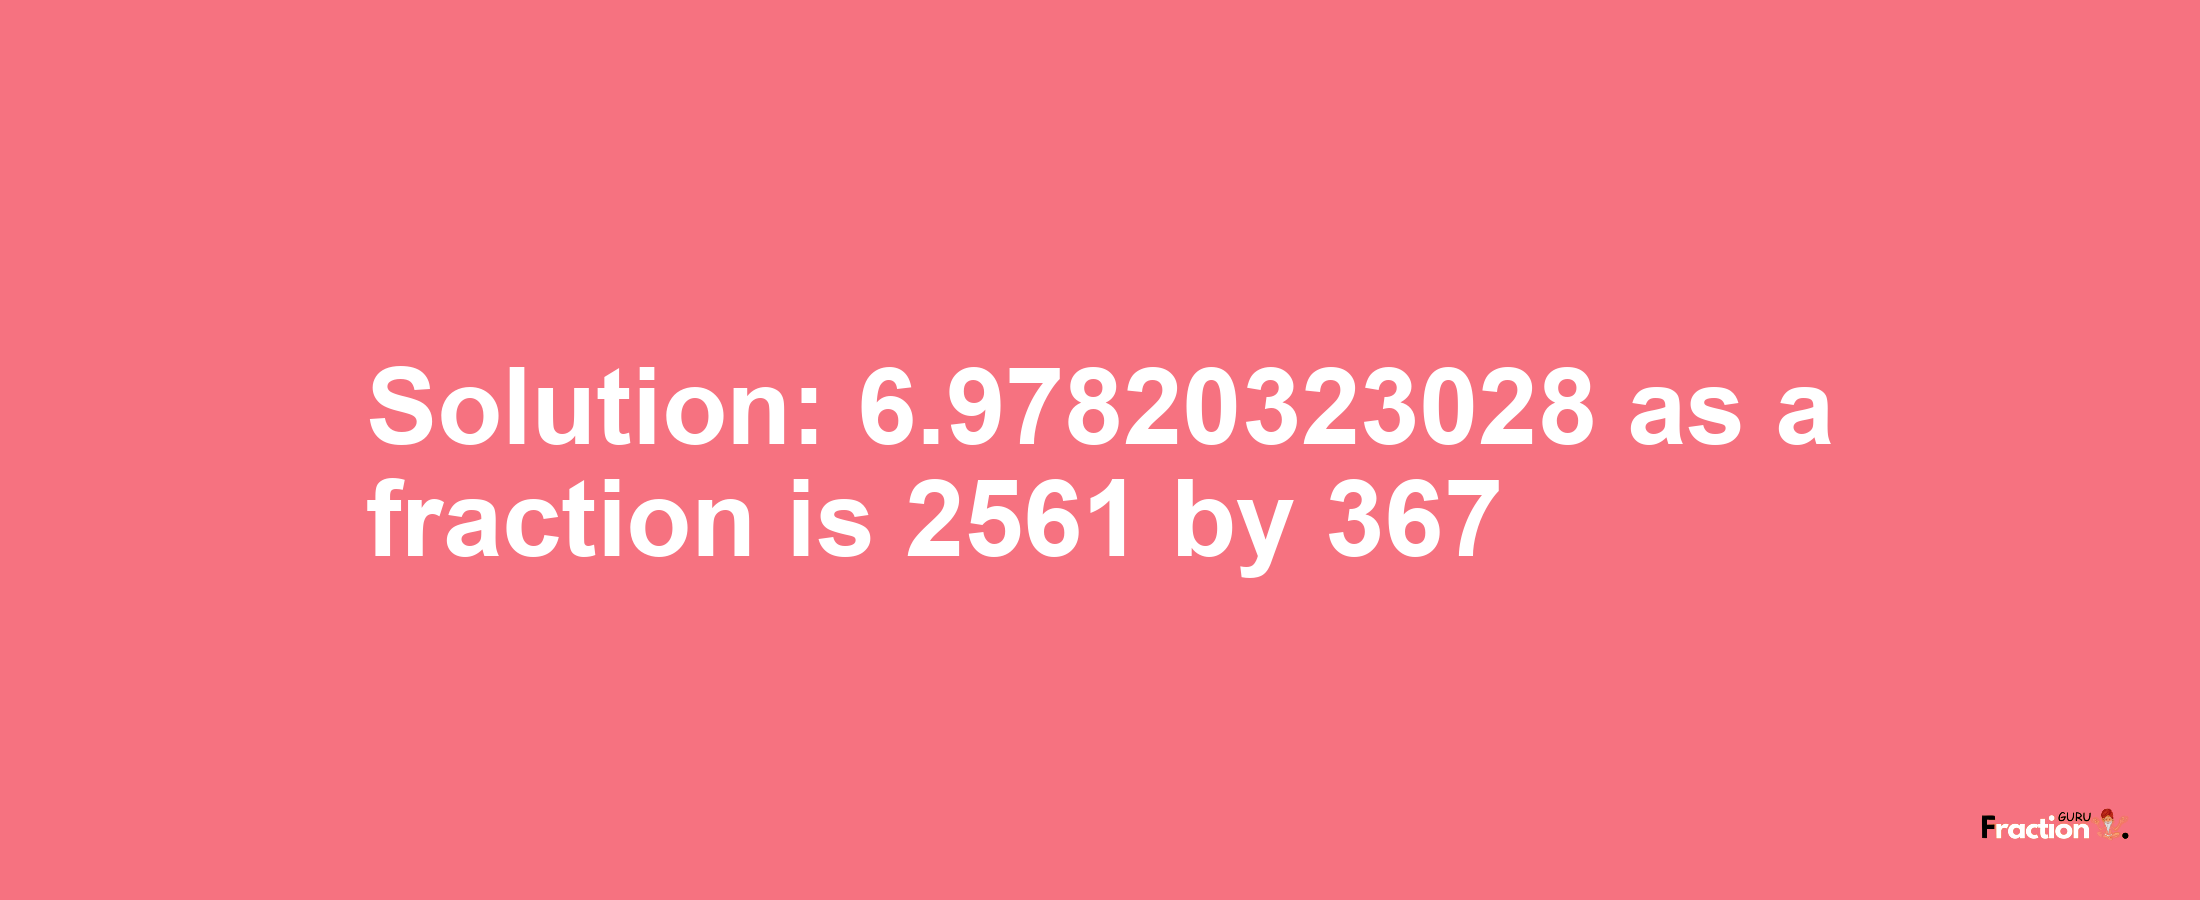 Solution:6.97820323028 as a fraction is 2561/367